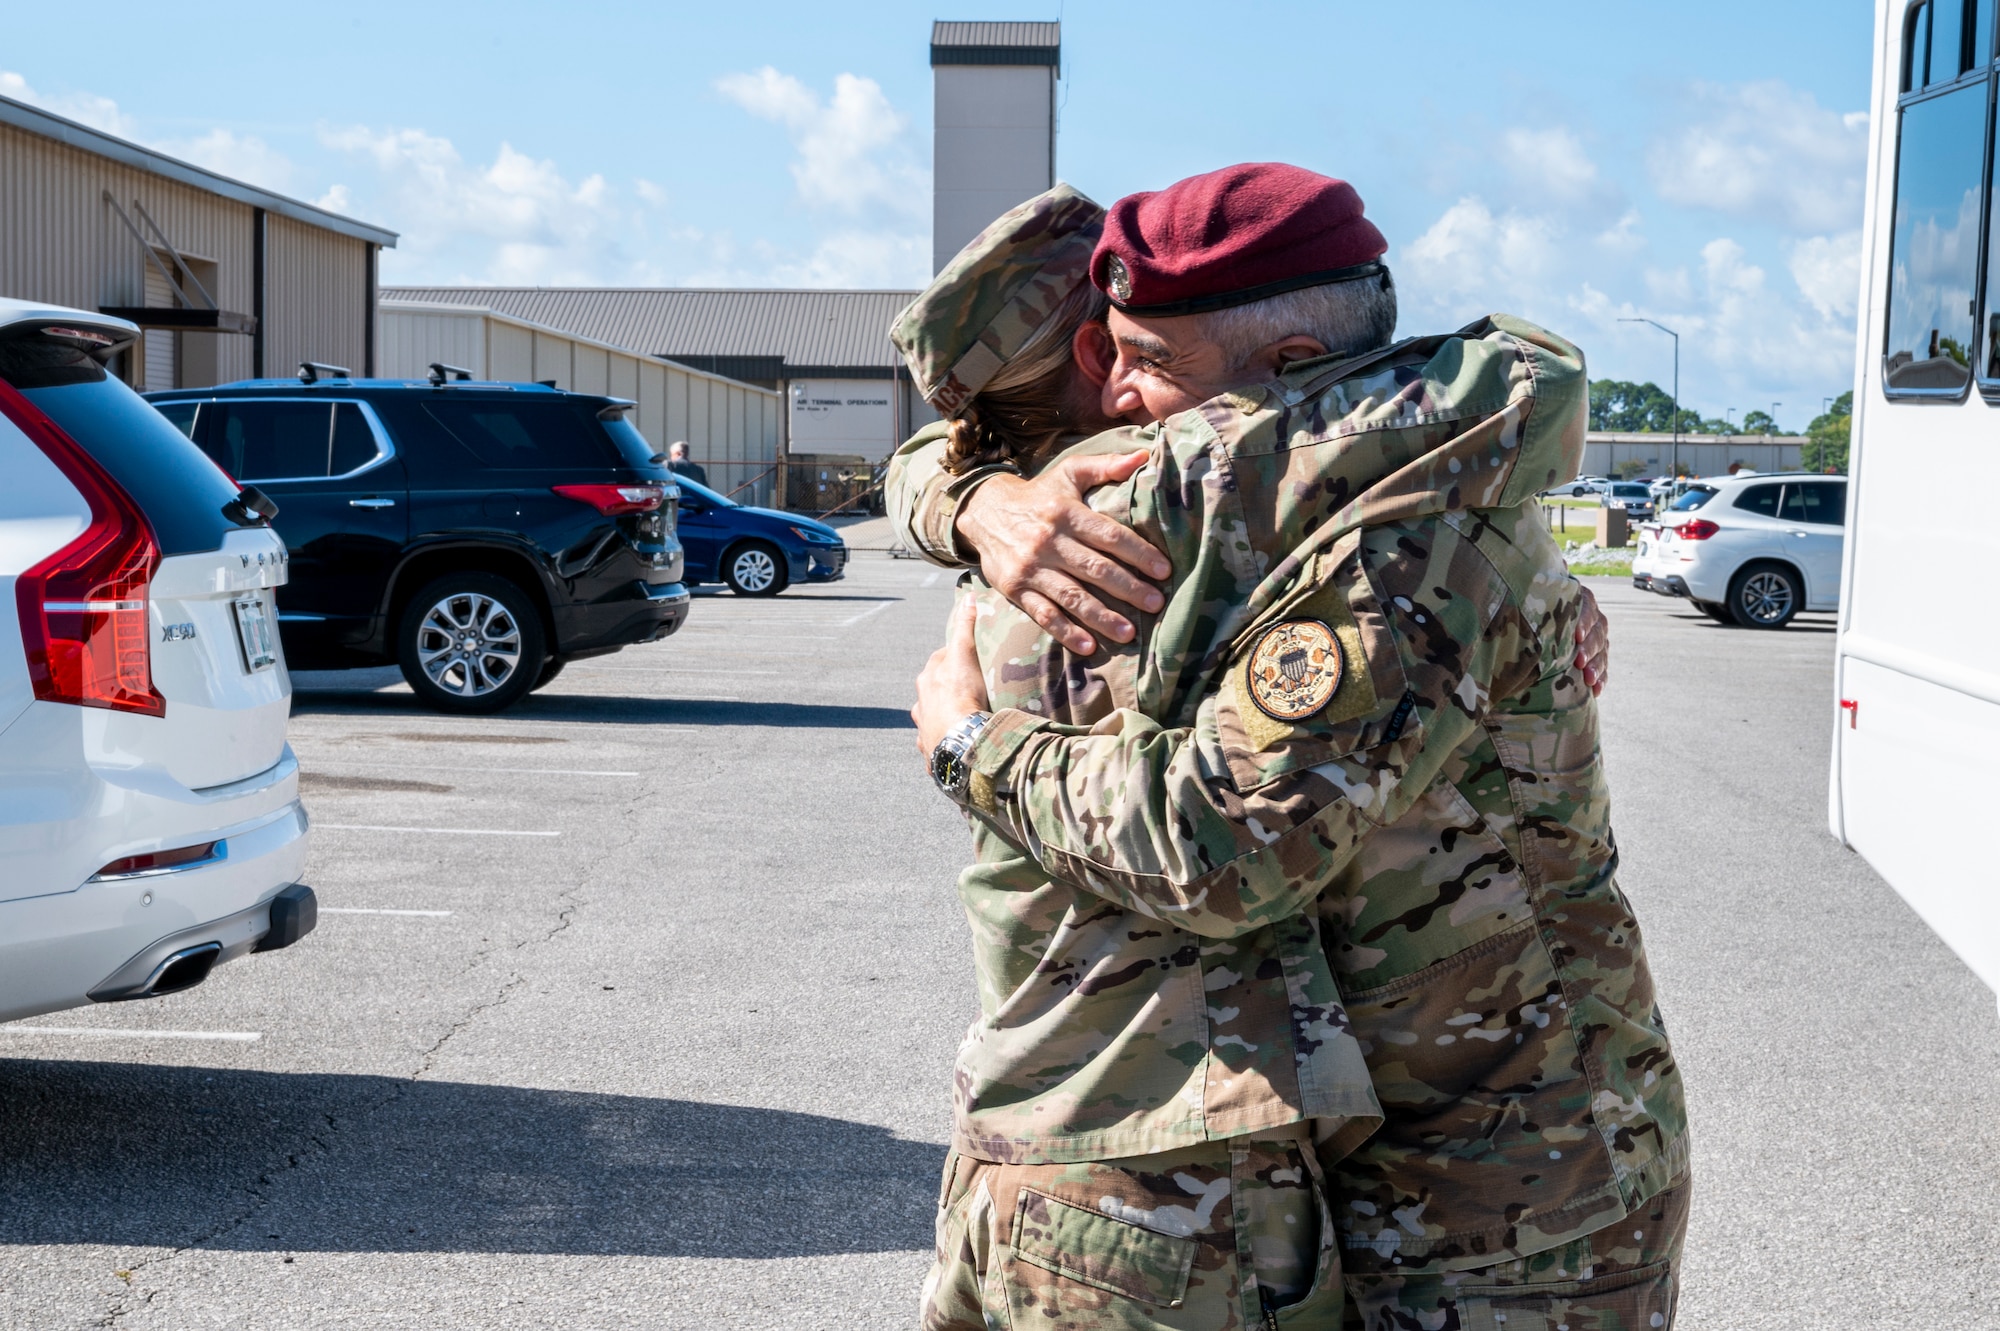 U.S. Air Force Col. Allison Black, 1st Special Operations Wing commander, hugs SEAC Ramón Colón-López, Senior Enlisted Advisor to the Chairman of the Joint Chiefs of Staff, before attending the Talon 13 Remembrance Ceremony Aug. 5, 2022 at Hurlburt Field, Florida. During his visit, the SEAC attended the Talon 13 Remembrance Ceremony, visited AFSOC Headquarters and 24th Special Operations Wing, had lunch with Airmen, and hosted an All-Call. The SEAC serves as the 4th Senior Enlisted Advisor to the Chairman of the Joint Chiefs of Staff, the most senior enlisted service member, by position, in the United States Armed Forces, and the principal military advisor to the Chairman on all matters involving joint and combined total force integration, utilization, health of the force, and joint development for enlisted personnel.